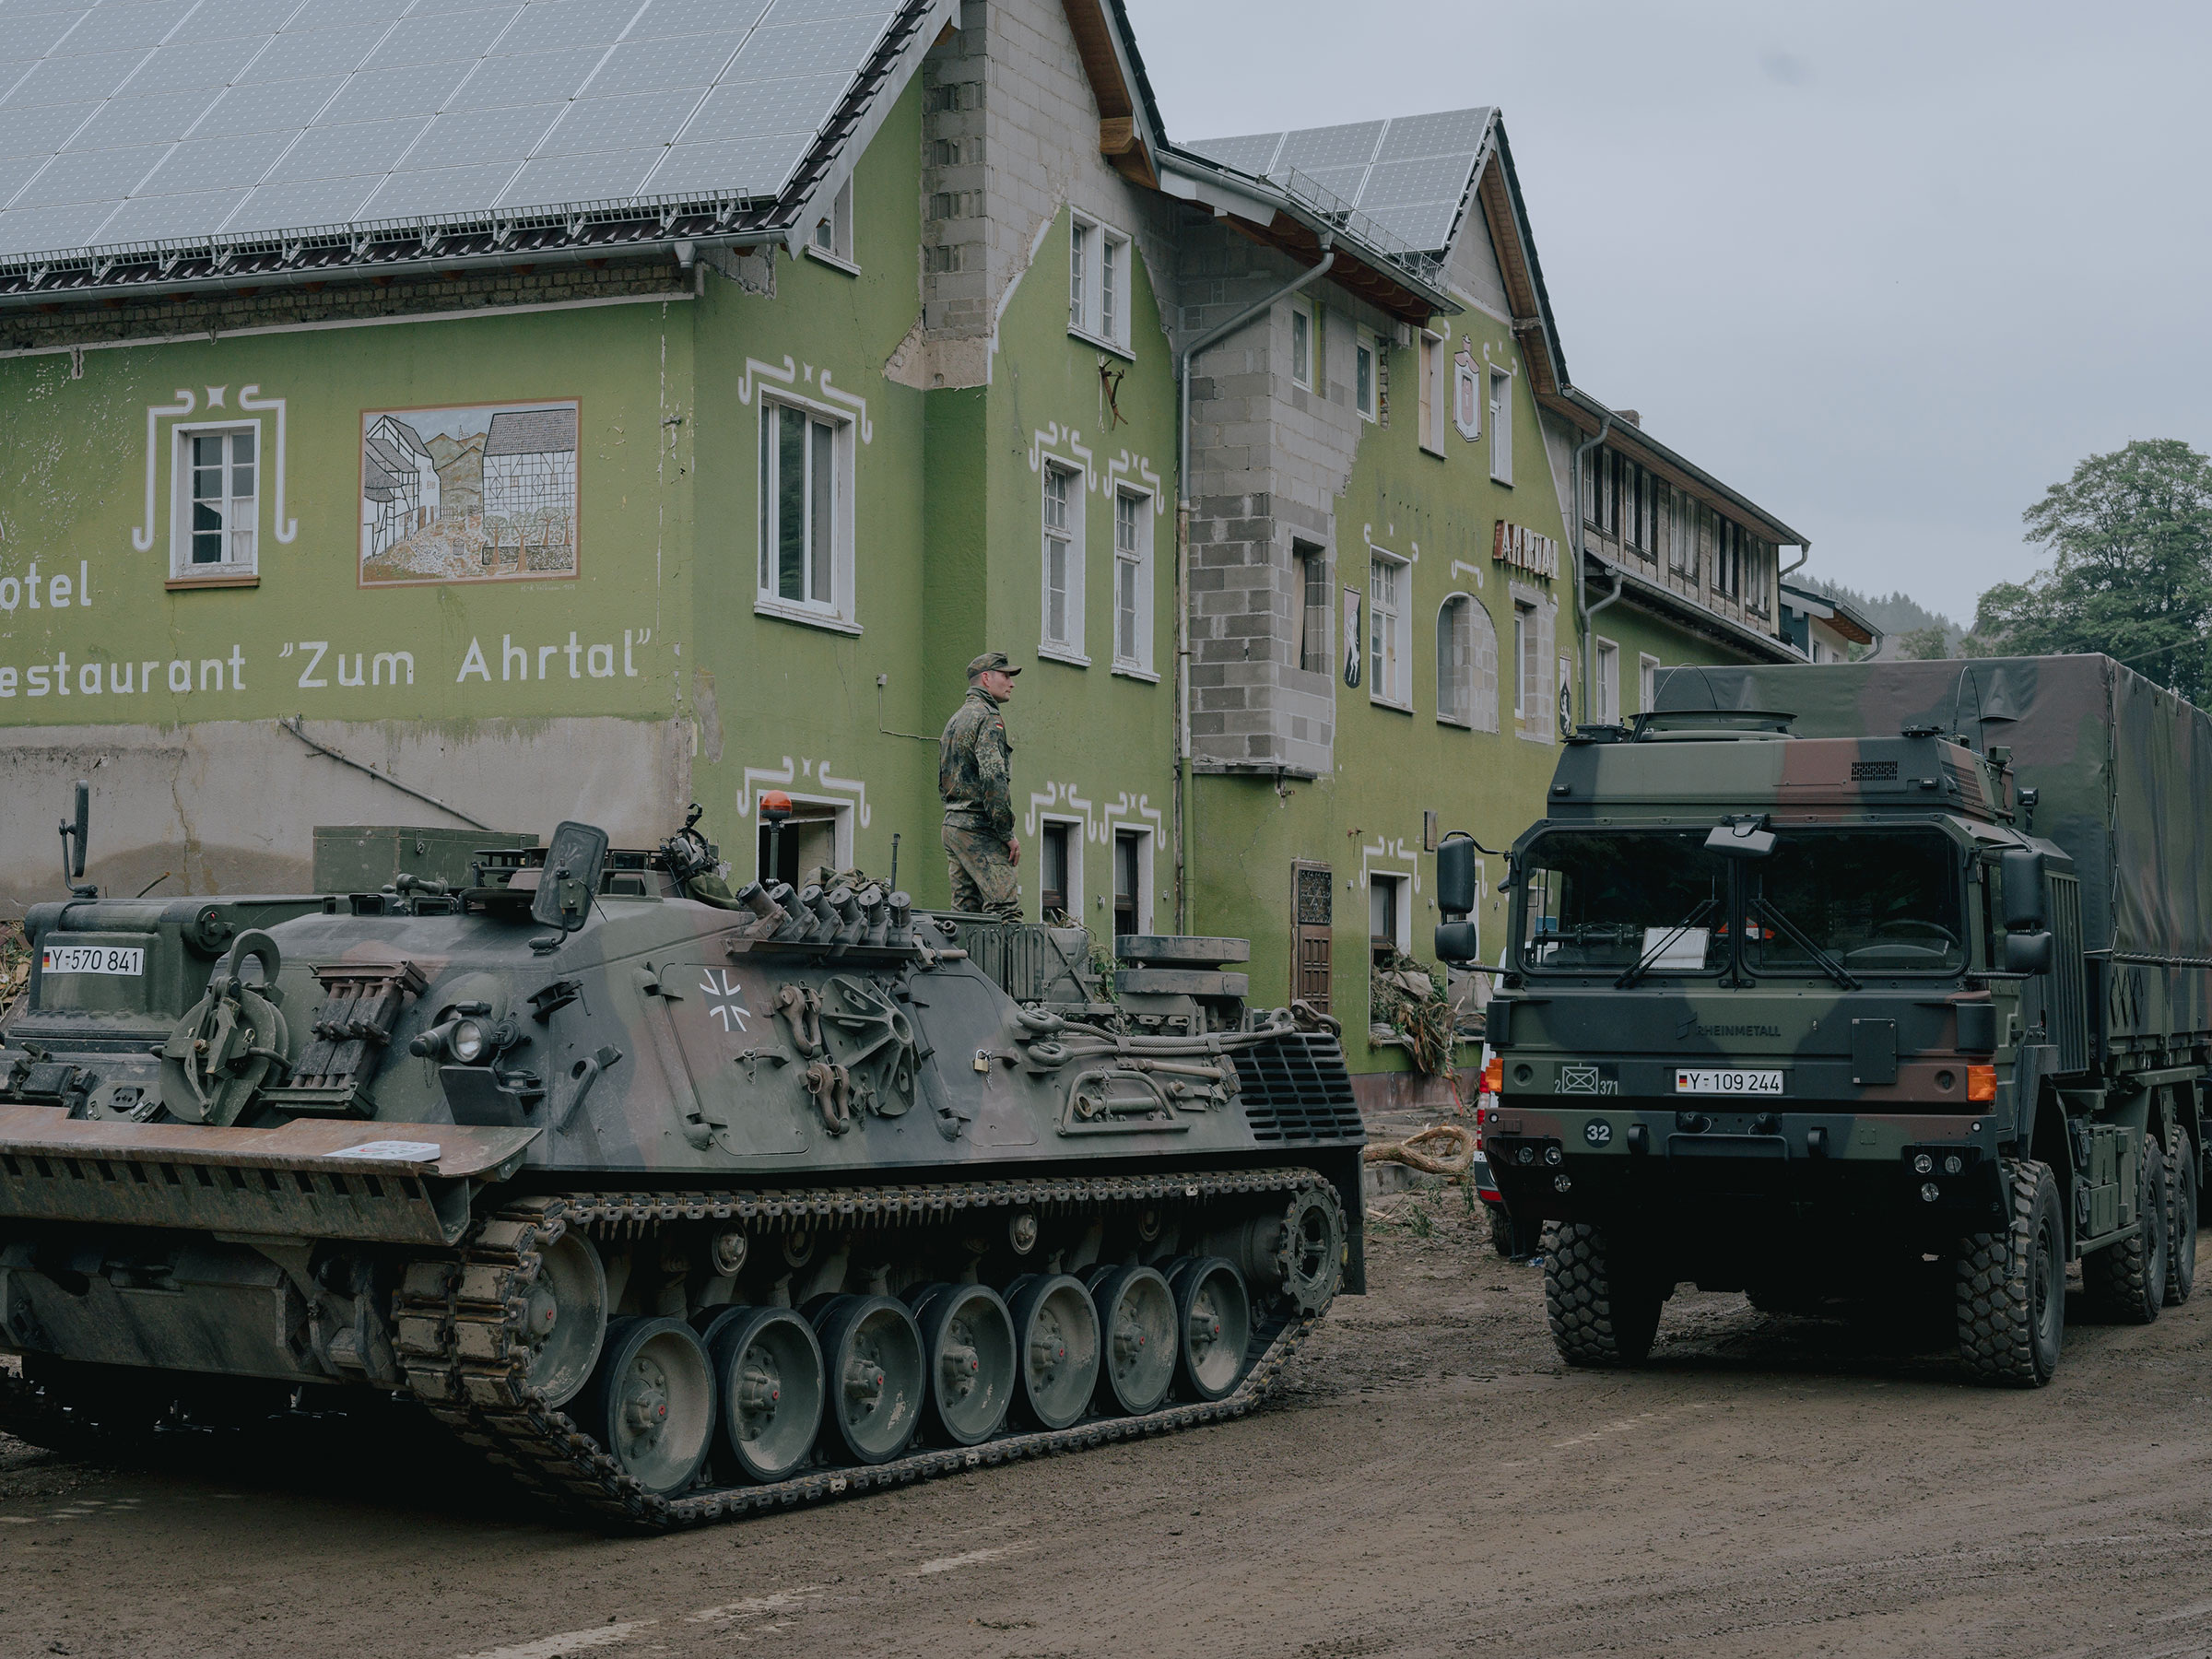 A military unit supports the clean-up efforts in the village of Schuld, Germany, on July 16. (DOCKS Collective)